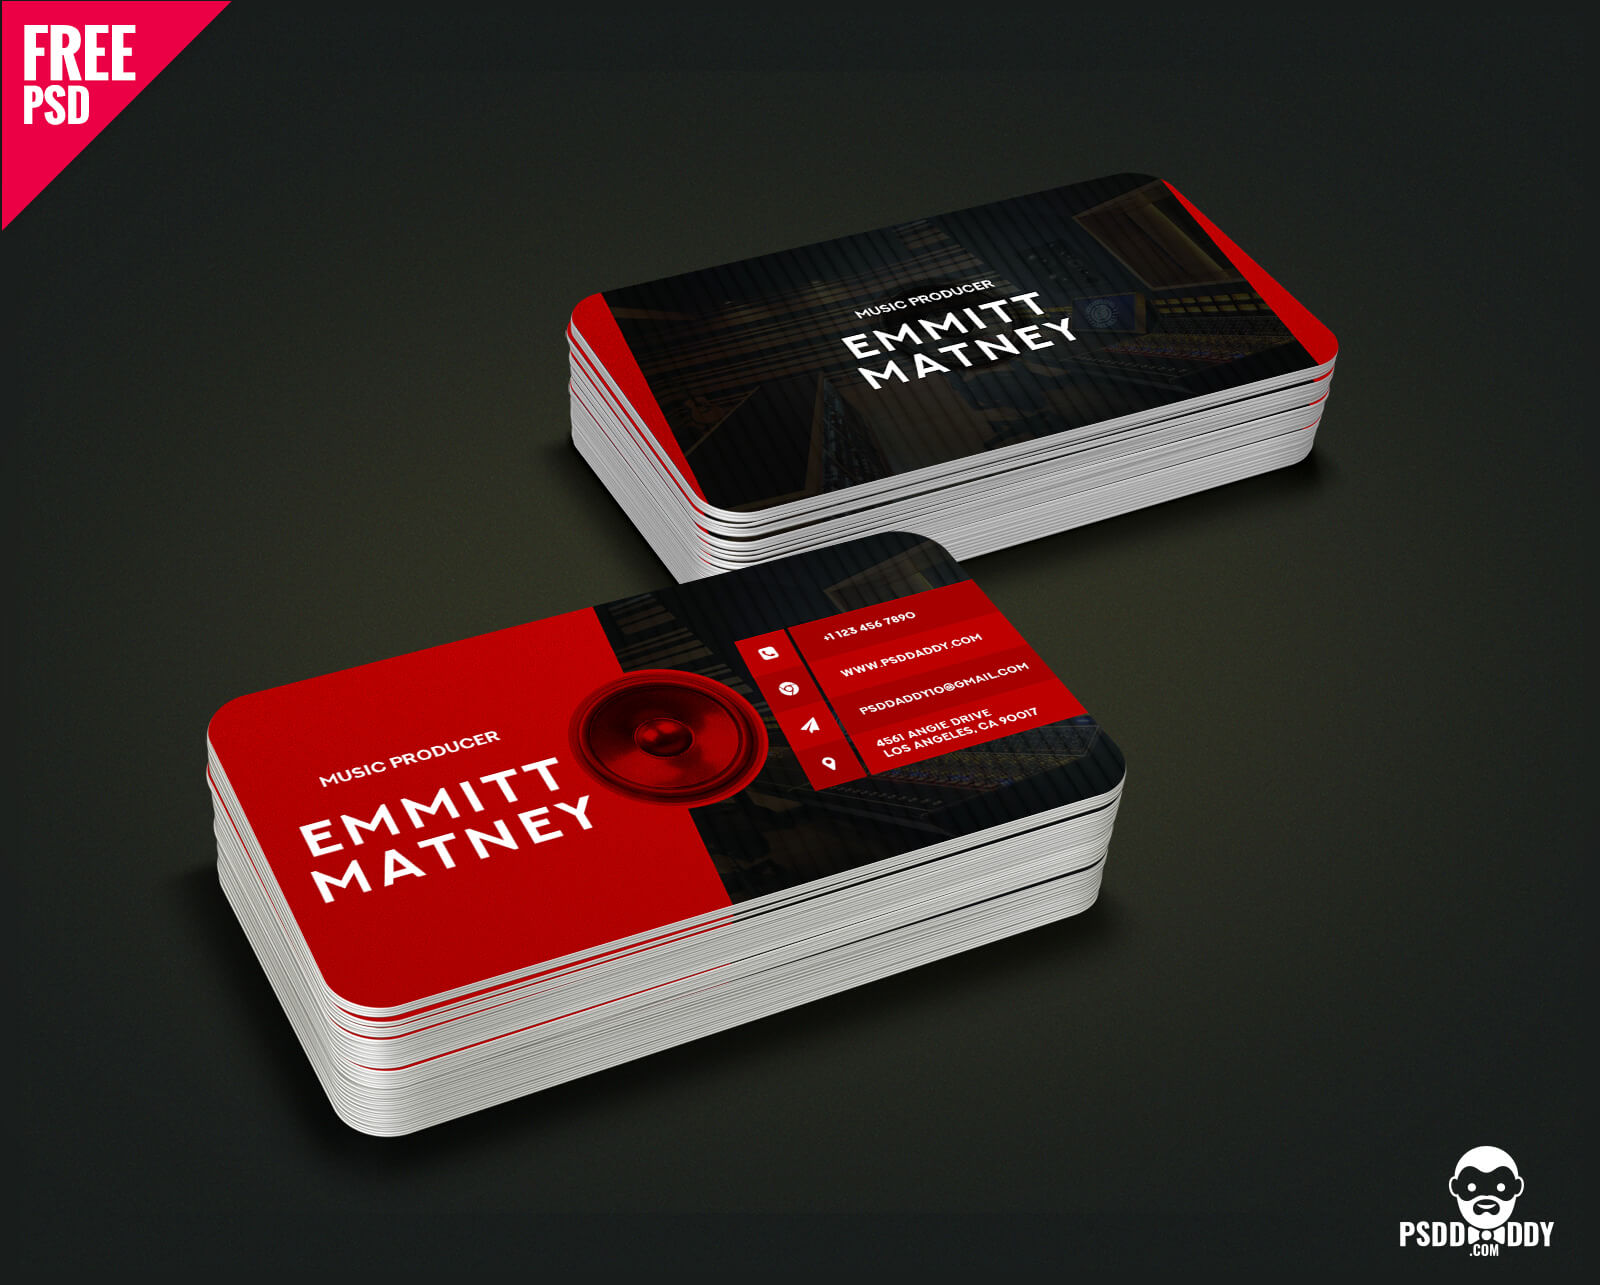 Download] Music Visiting Card Free Psd | Psddaddy Pertaining To Business Card Template Photoshop Cs6